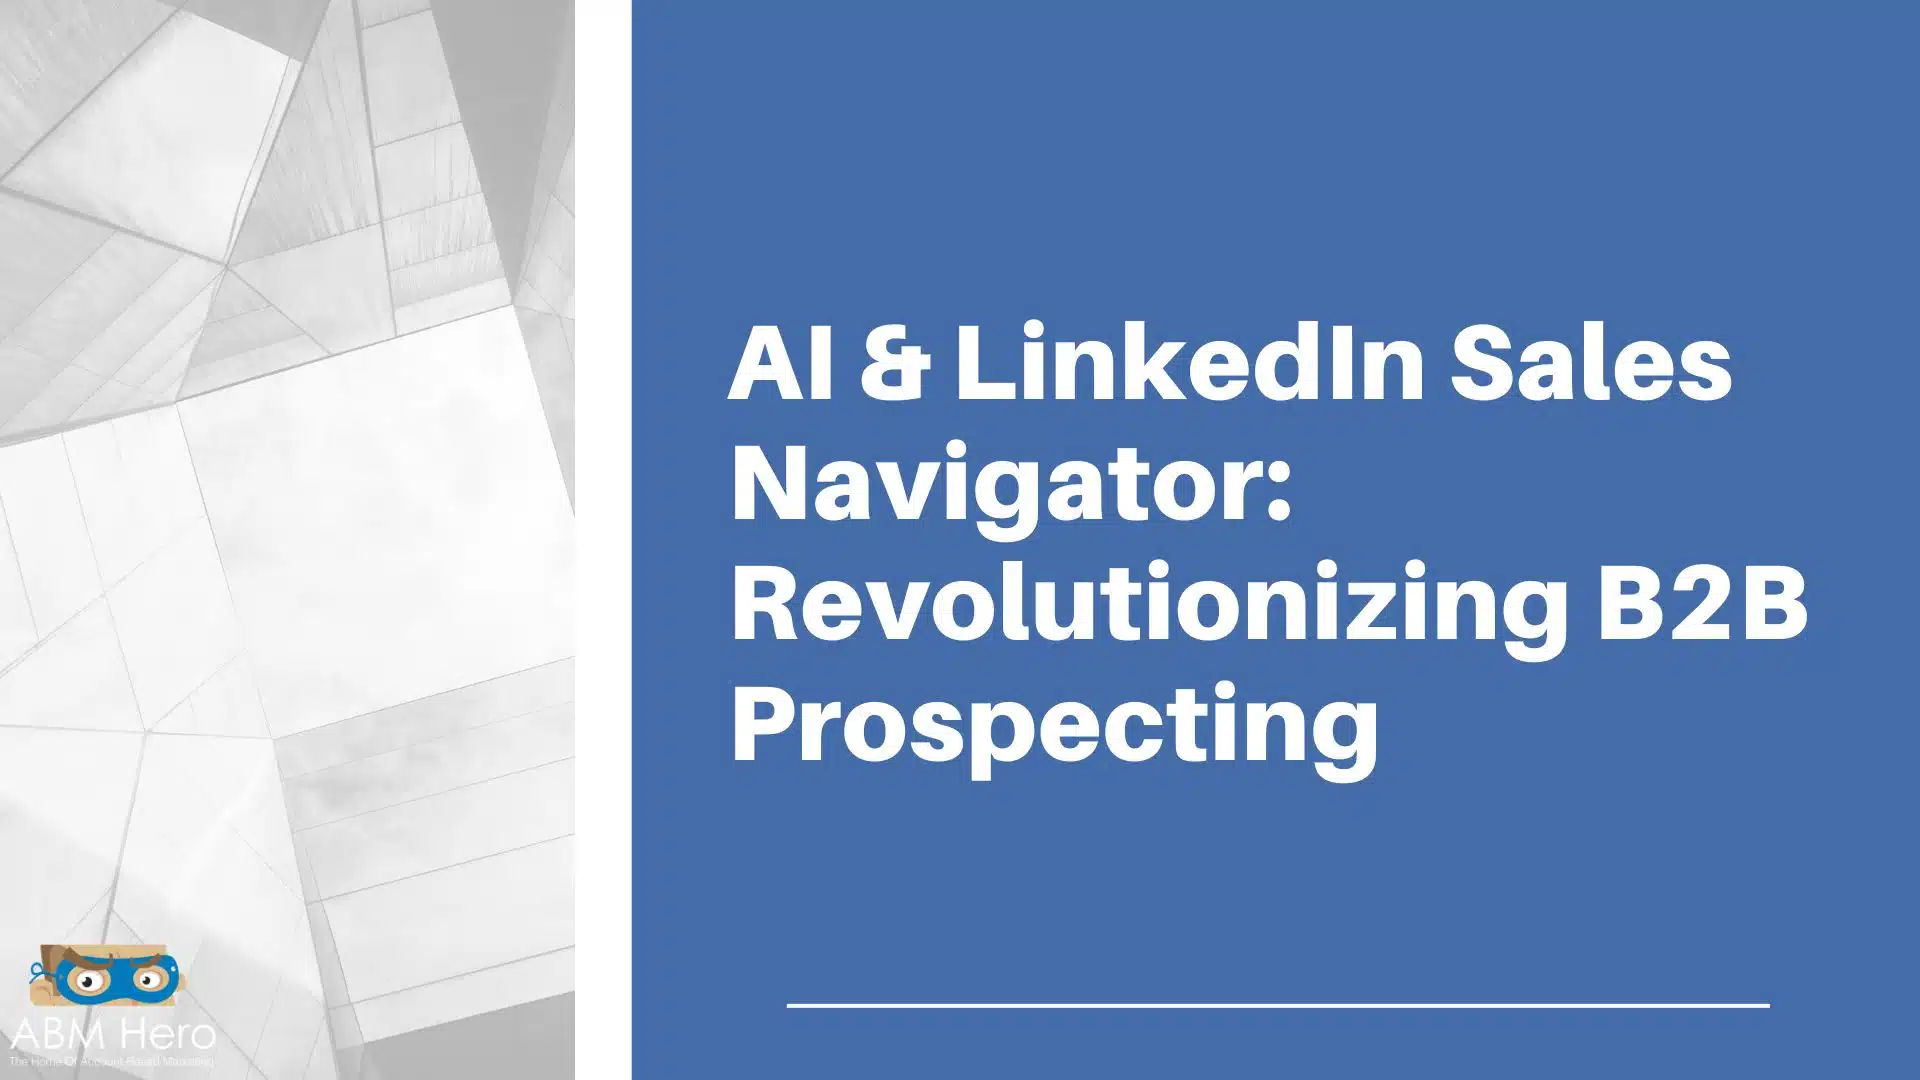 You are currently viewing AI & LinkedIn Sales Navigator: Revolutionizing B2B Prospecting